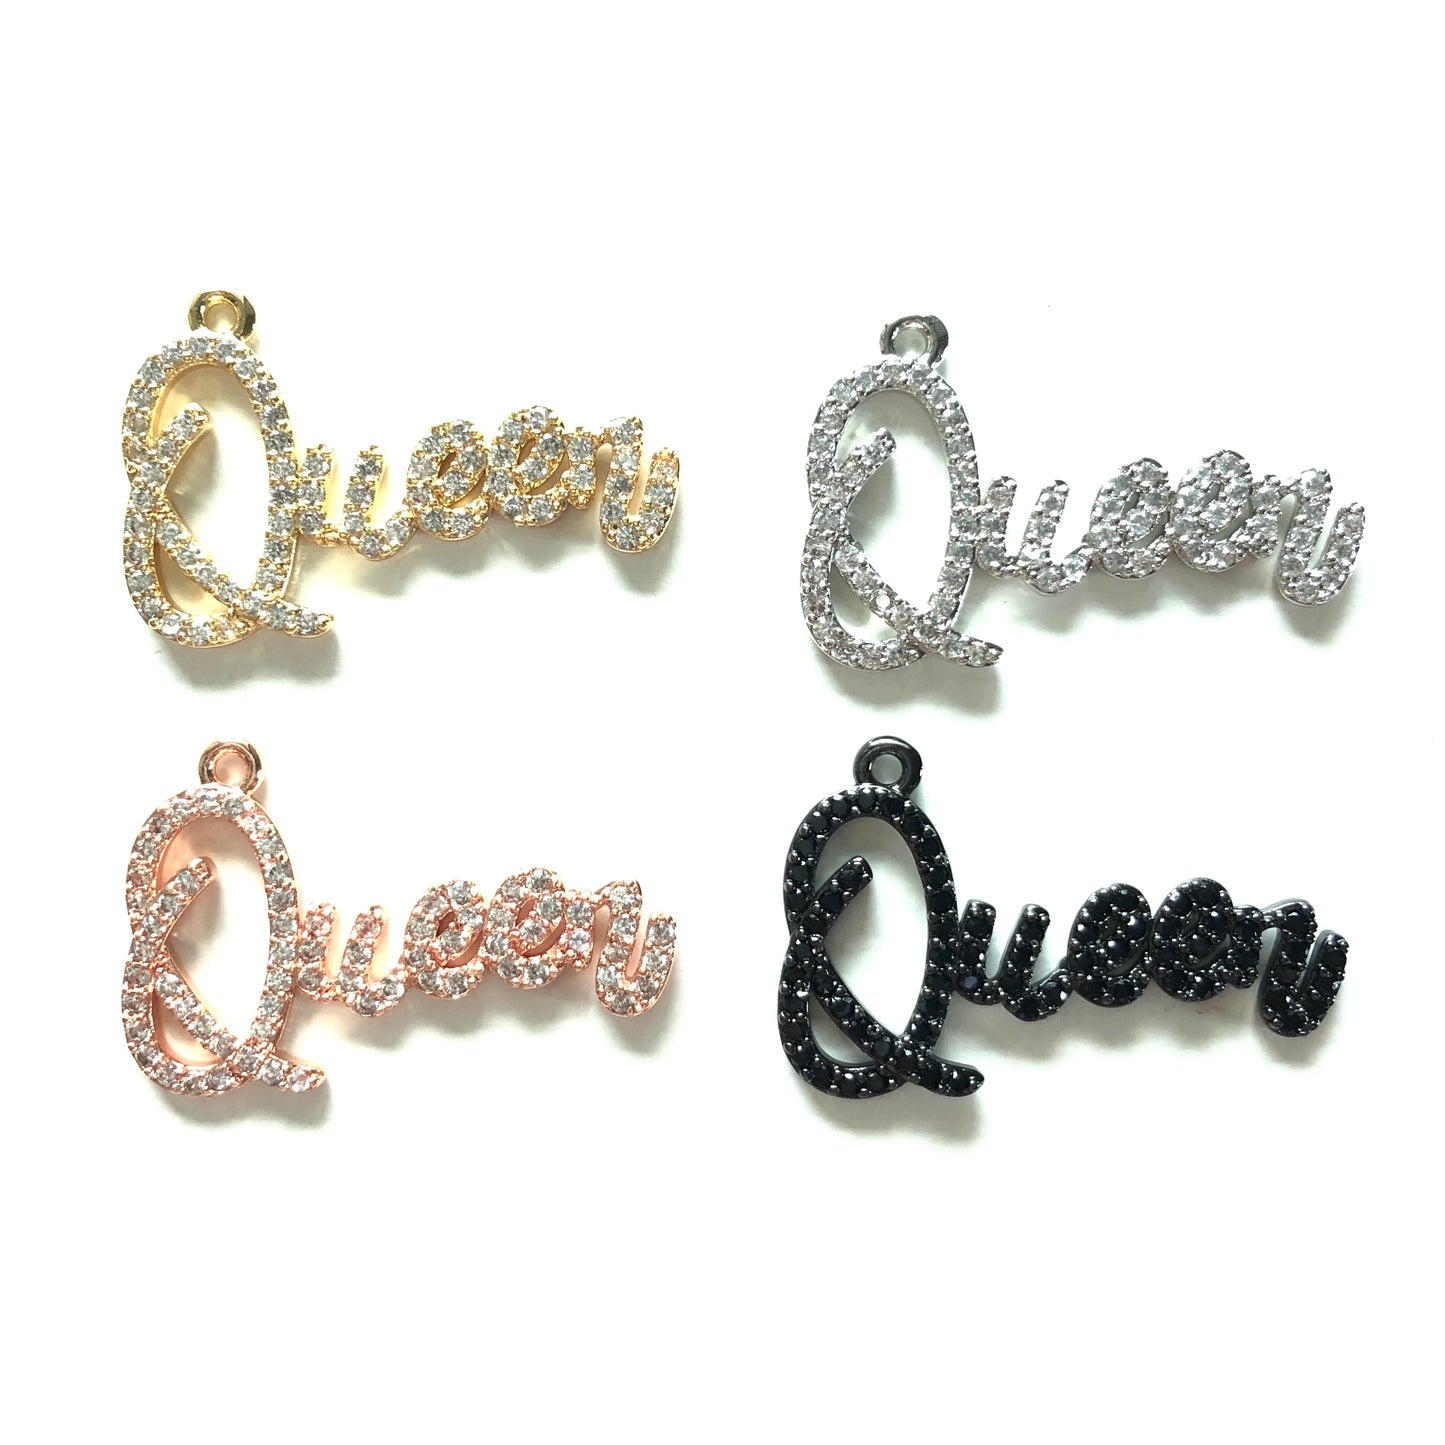 10pcs/lot 34*22.5mm CZ Paved Queen Charms CZ Paved Charms Queen Charms Words & Quotes Charms Beads Beyond